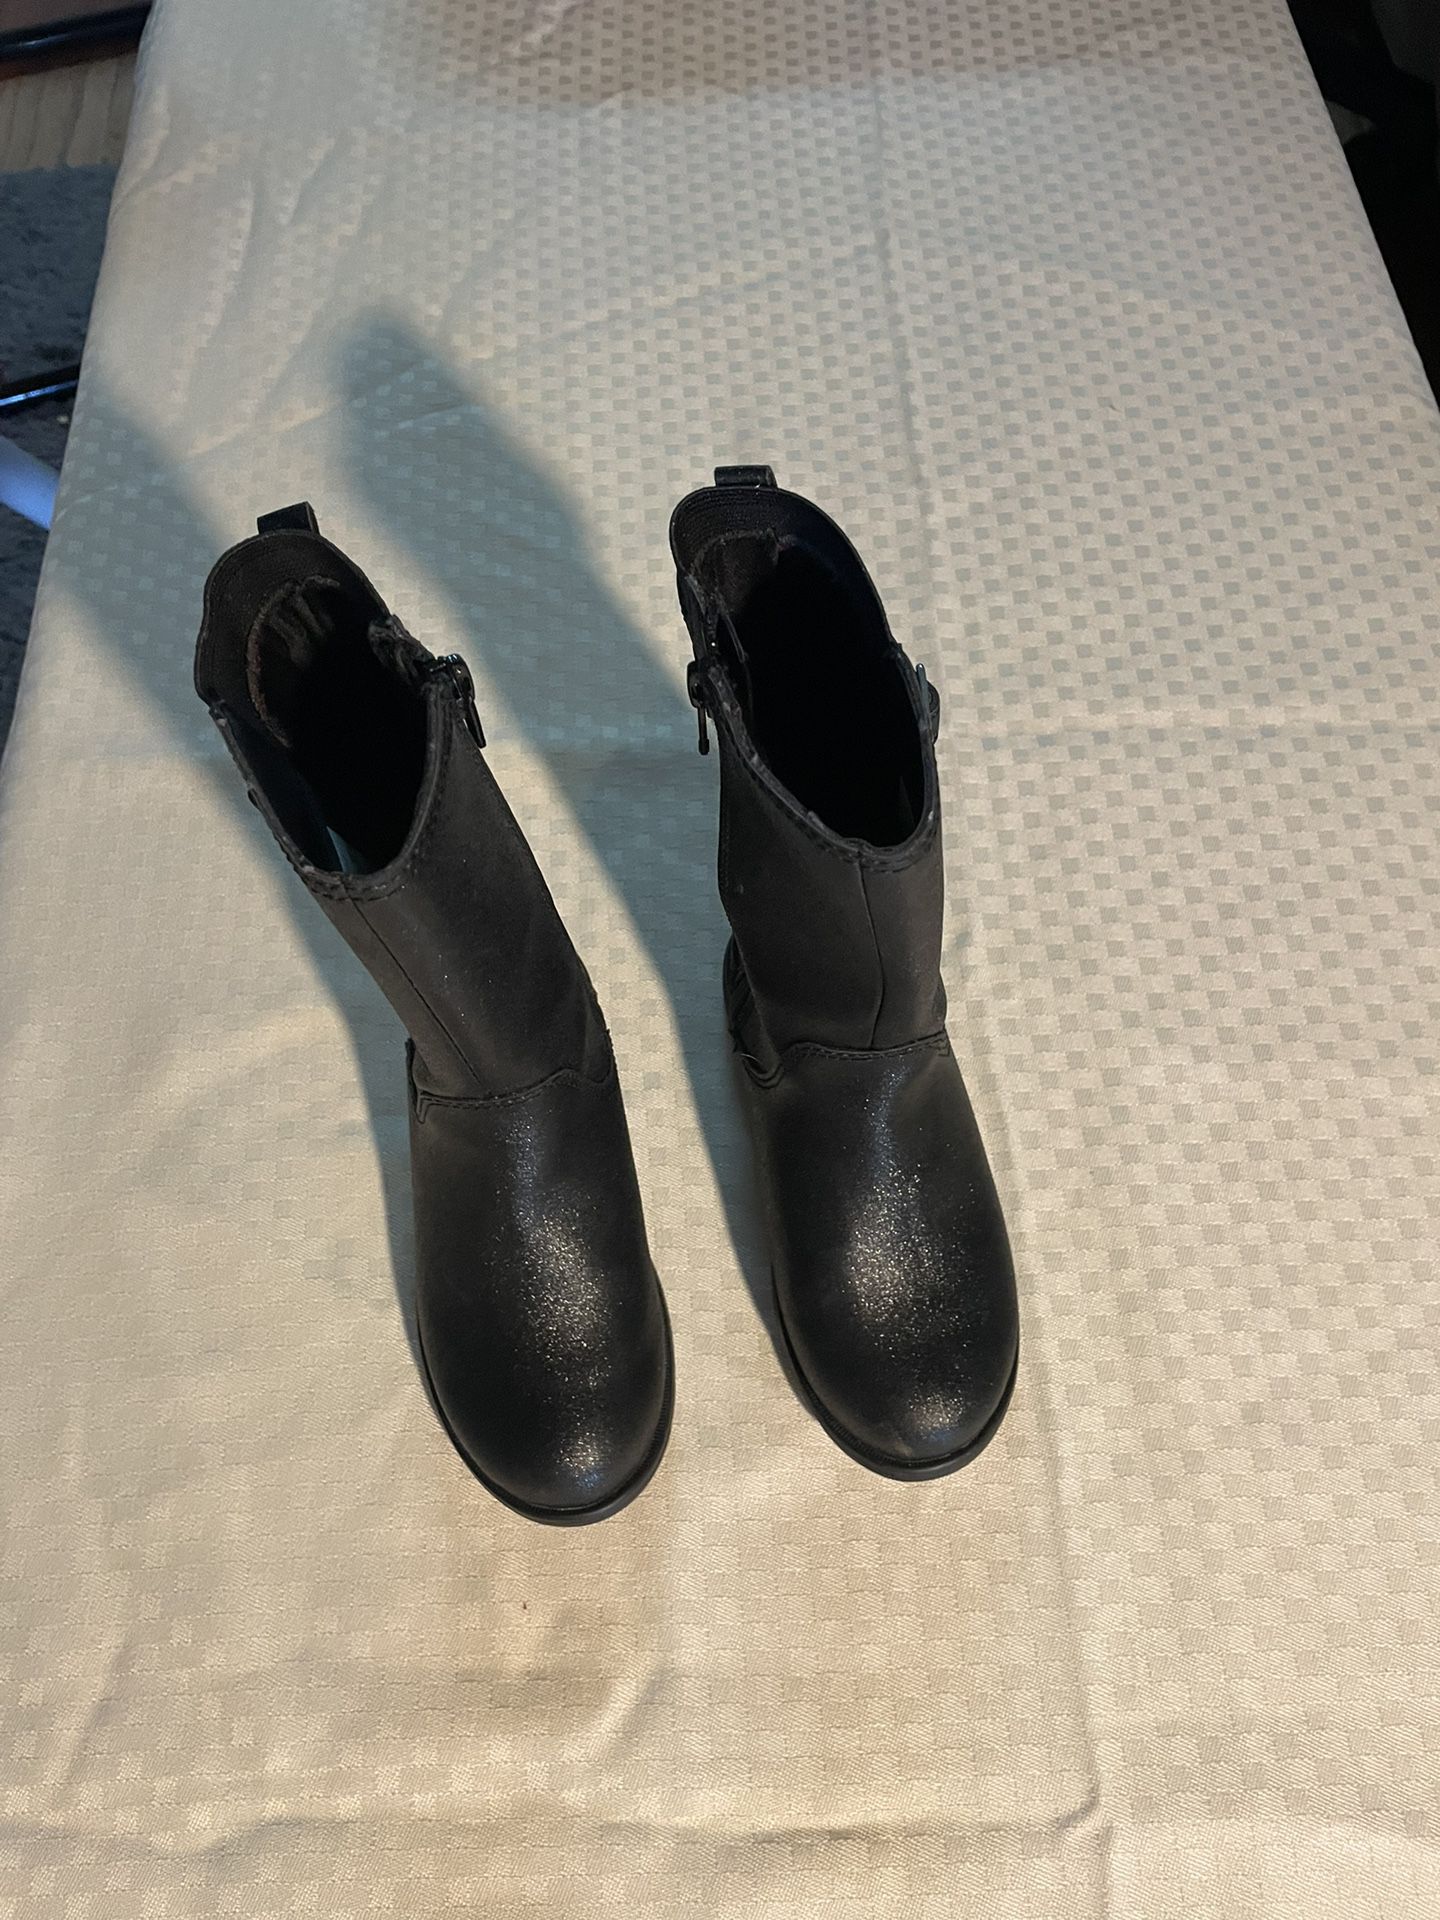 Girls Boots Size10 